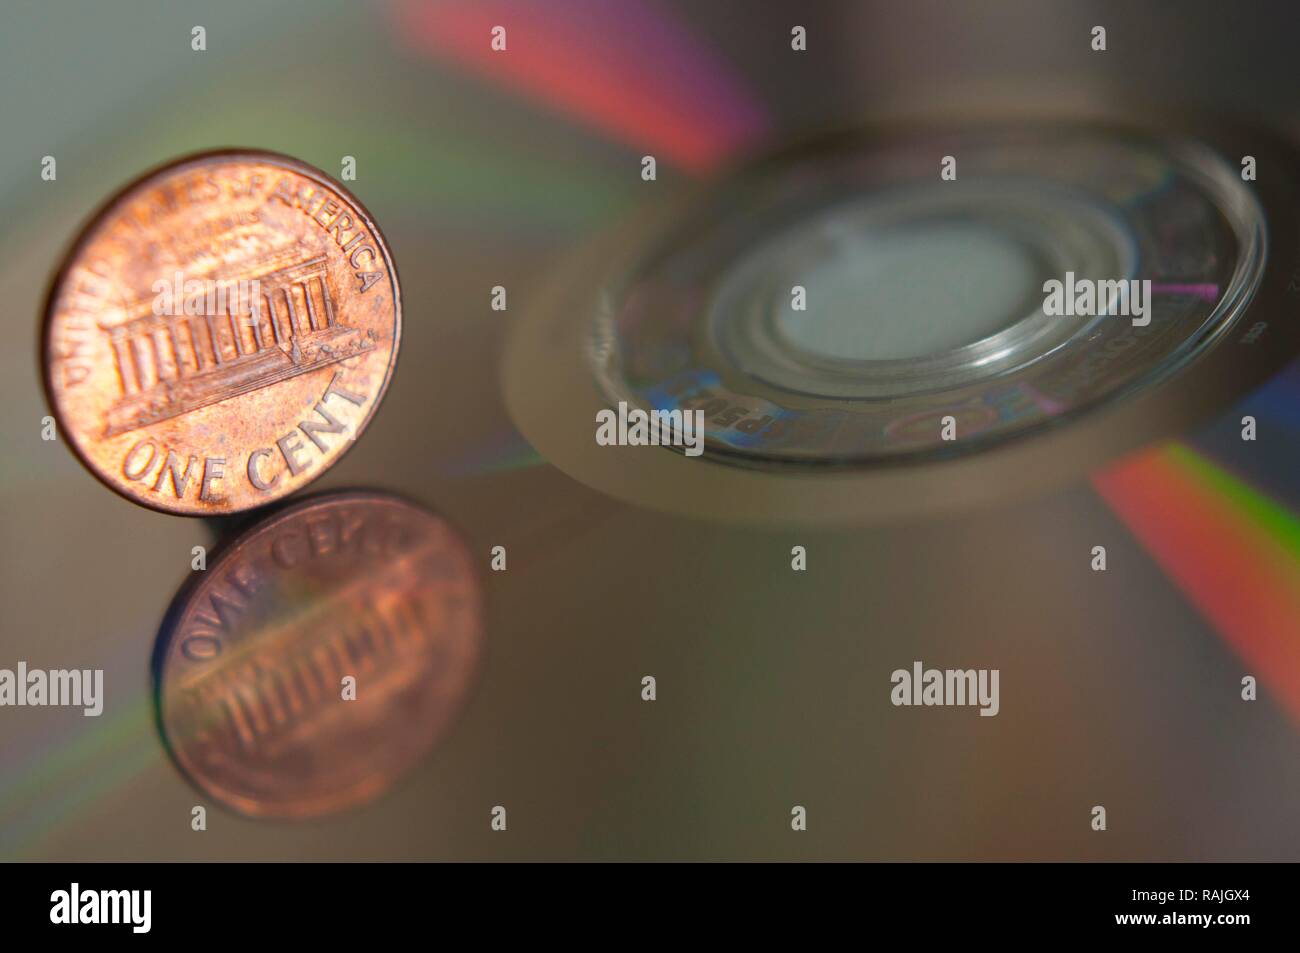 One cent, US currency, on an optical data disc Stock Photo